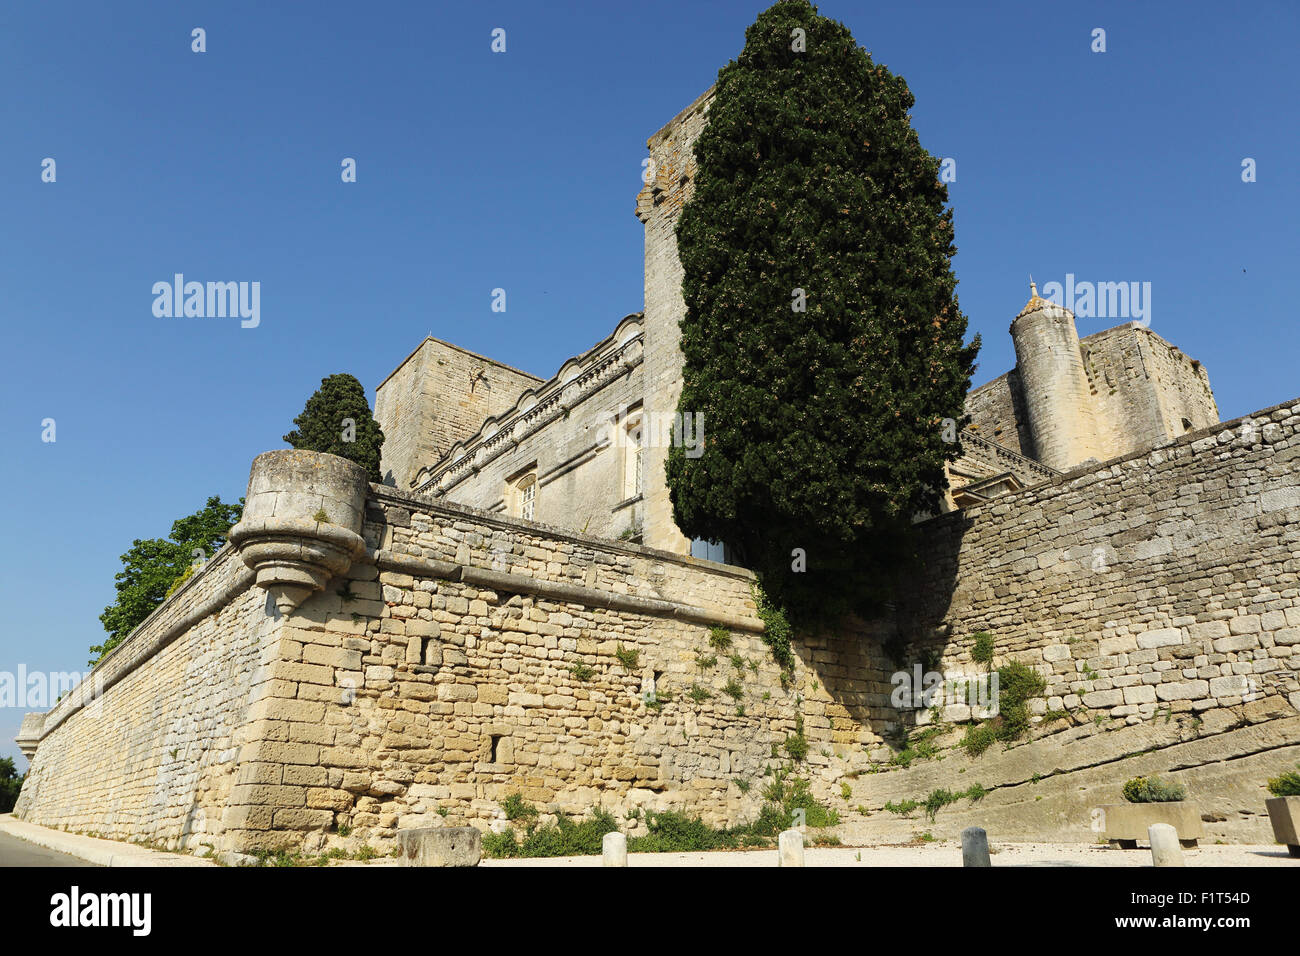 Viellevieille Castle, dating from the 11th century, with a Renaissance facade, Villevieille, Gard, Languedoc-Roussillon, France Stock Photo